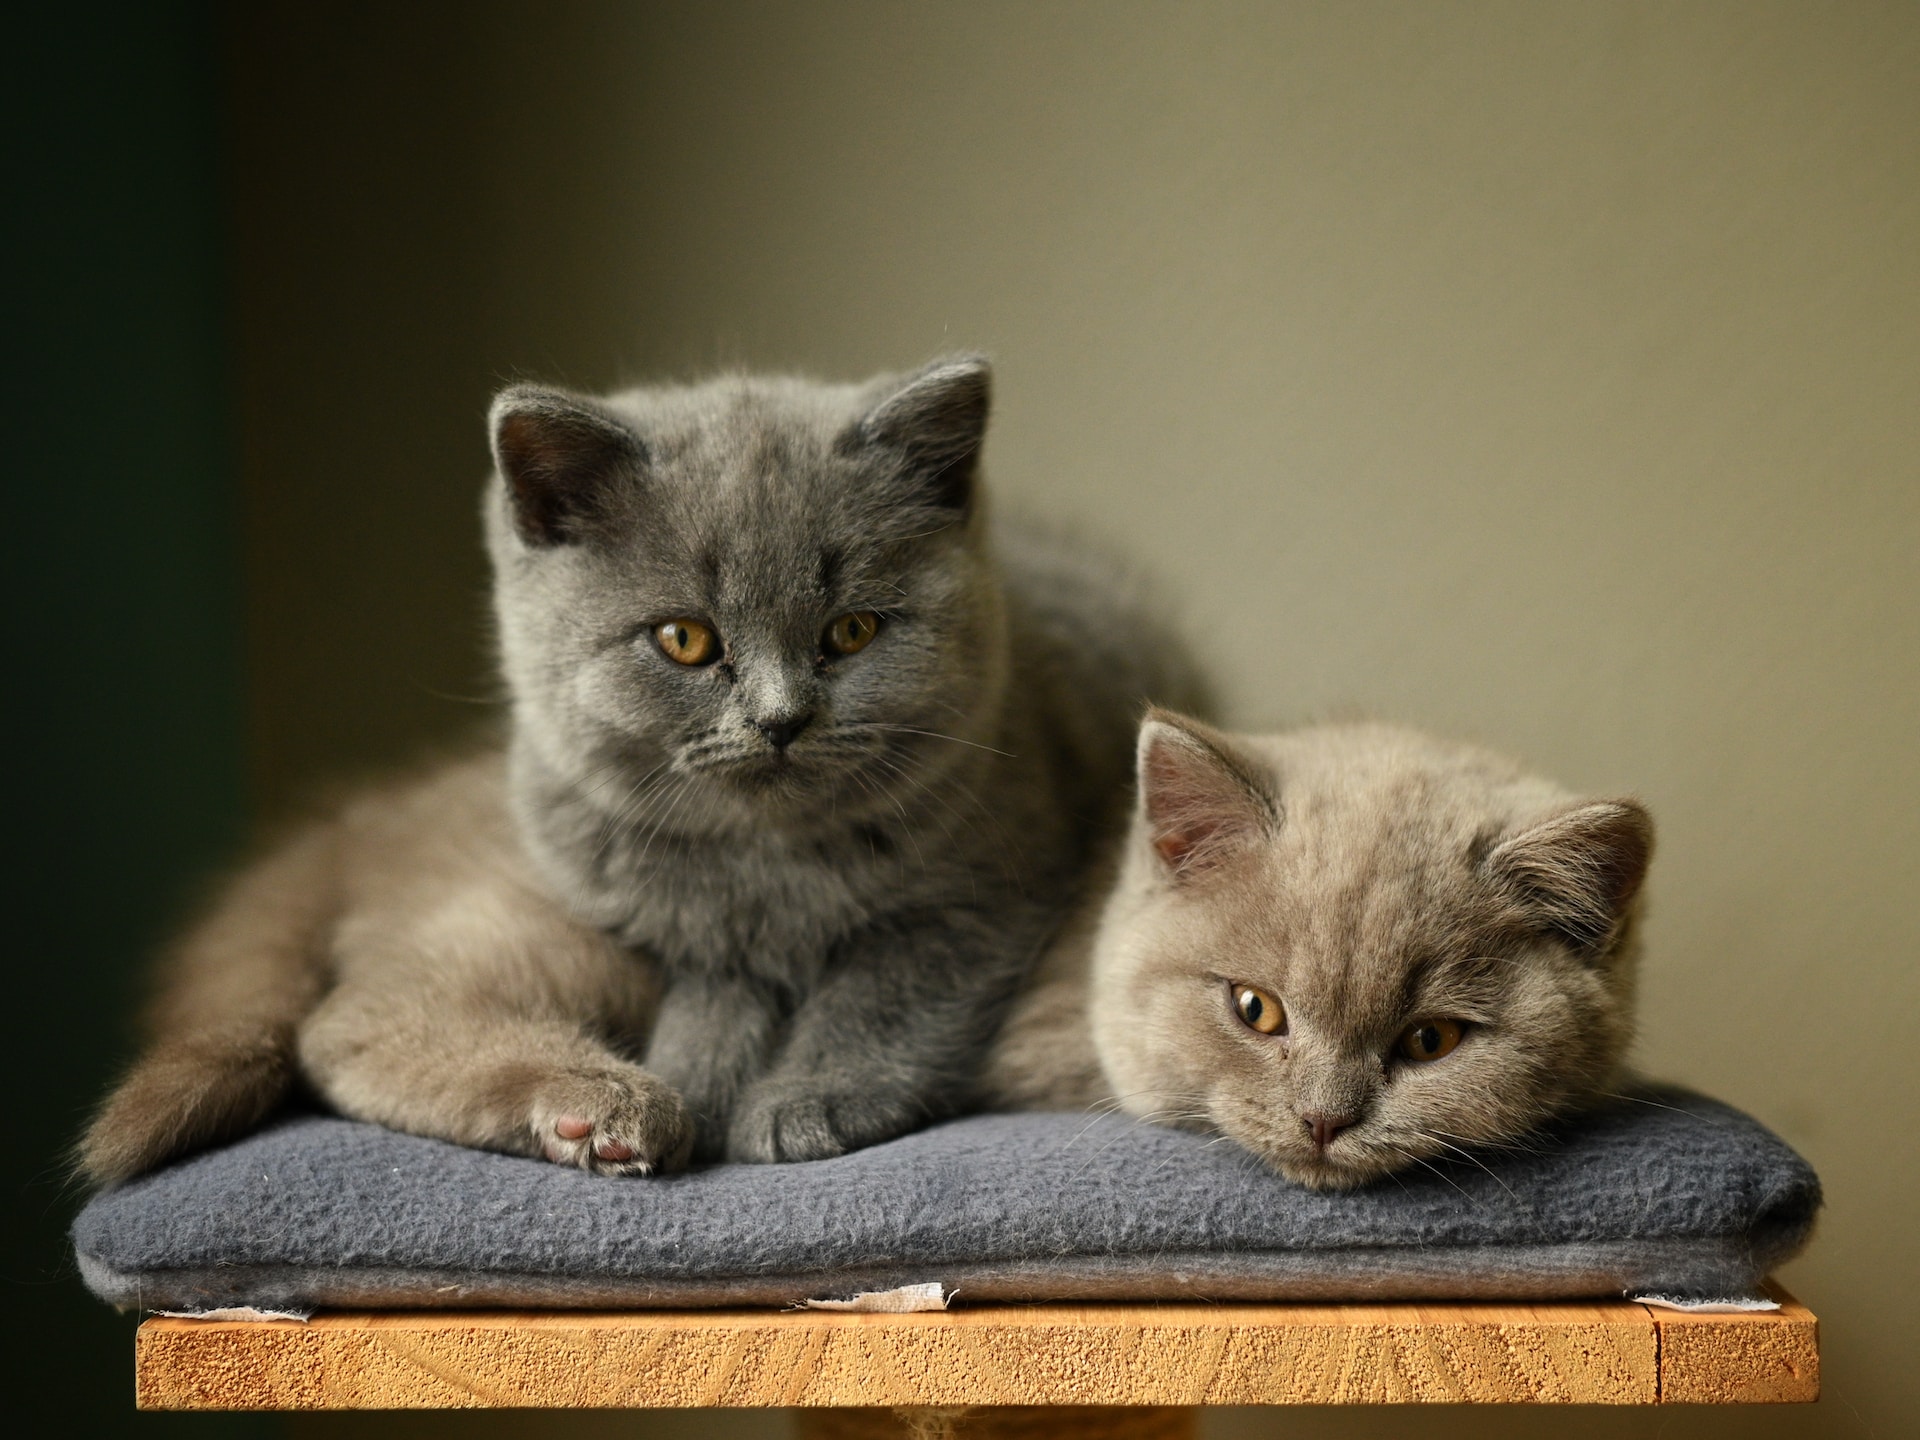 Two grey kittens sitting on a blanket